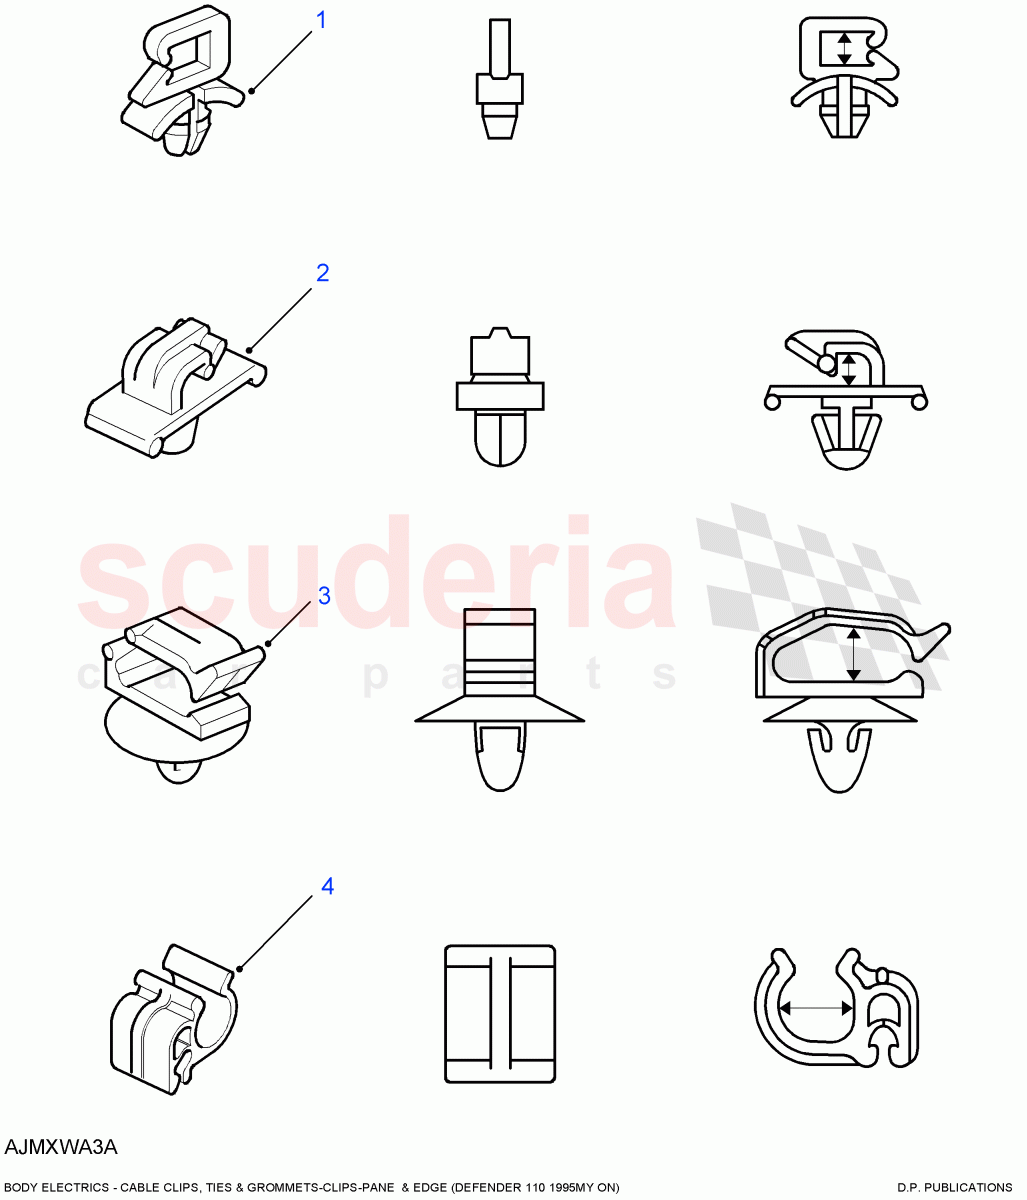 Clips-Panel & Edge((V)FROM7A000001) of Land Rover Land Rover Defender (2007-2016)